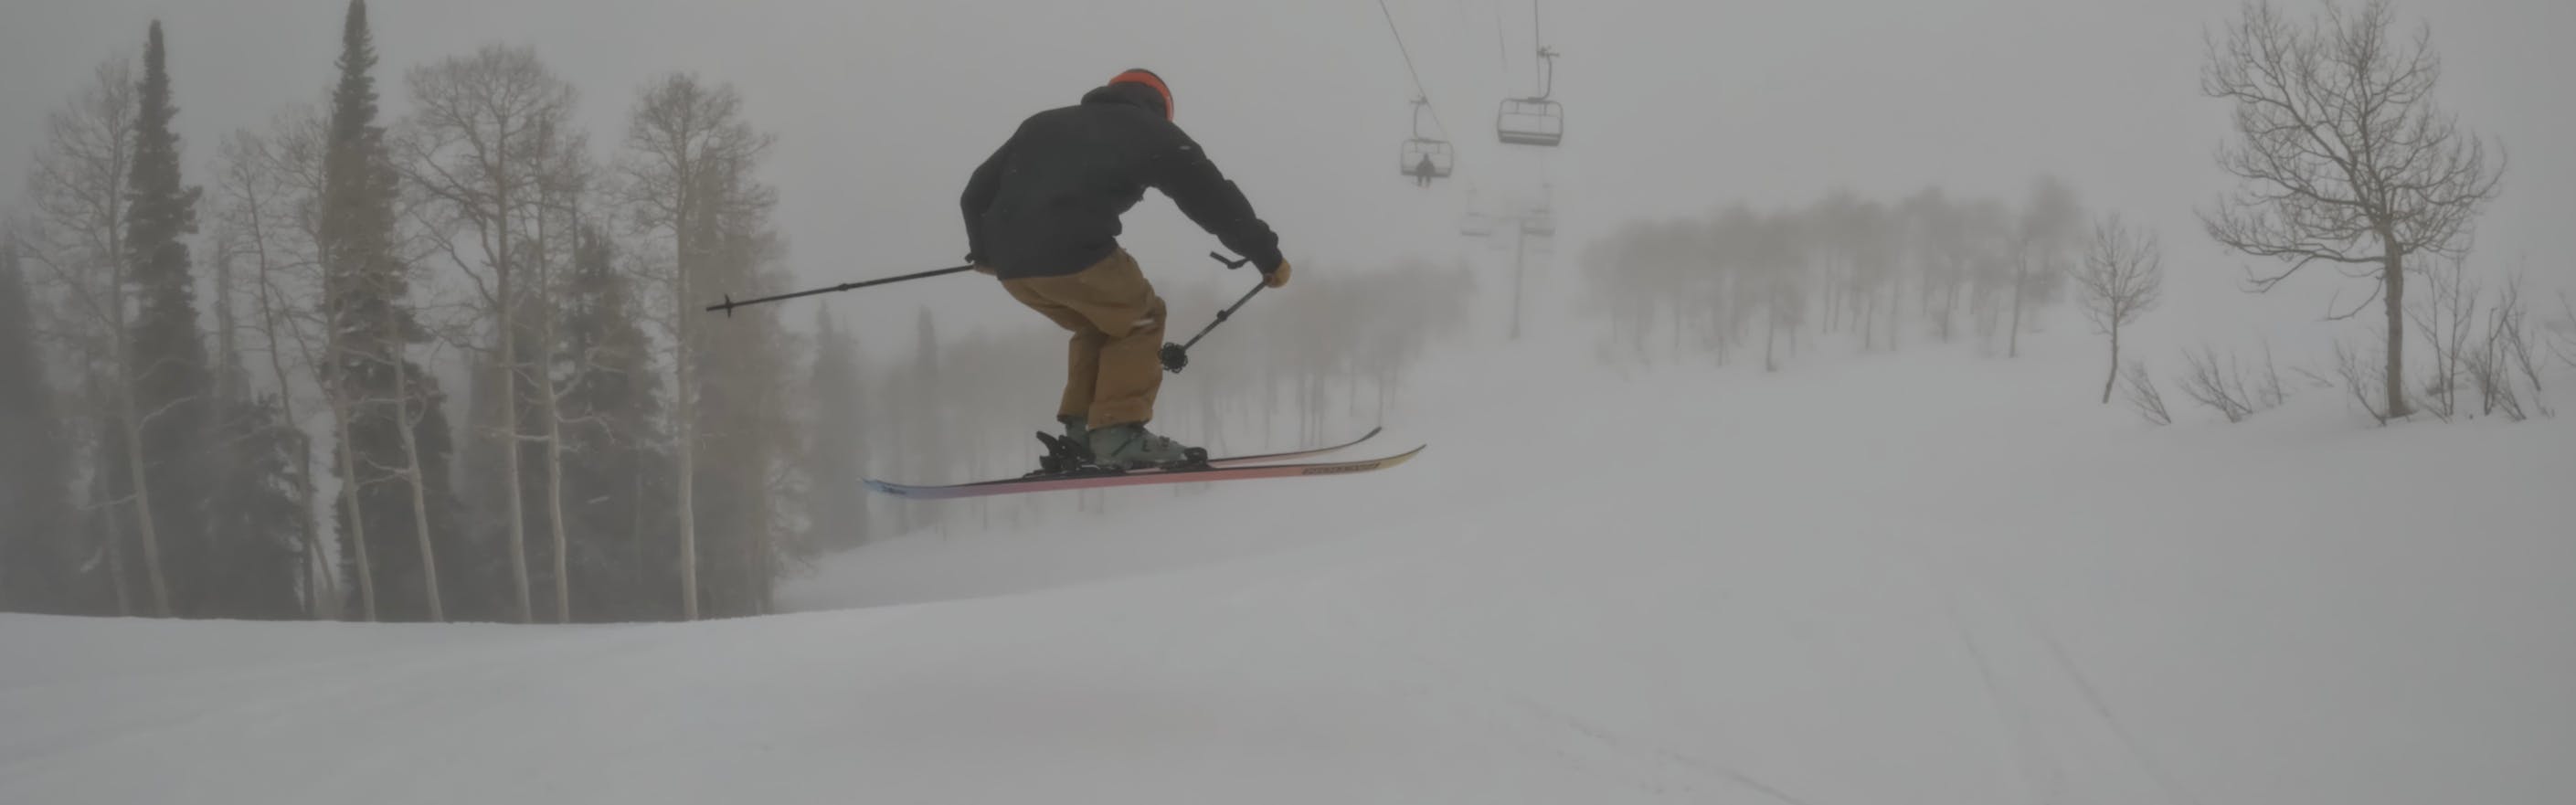 Ski Expert Theo jumping with the 2023 Faction Prodigy 2.0 skis in foggy conditions